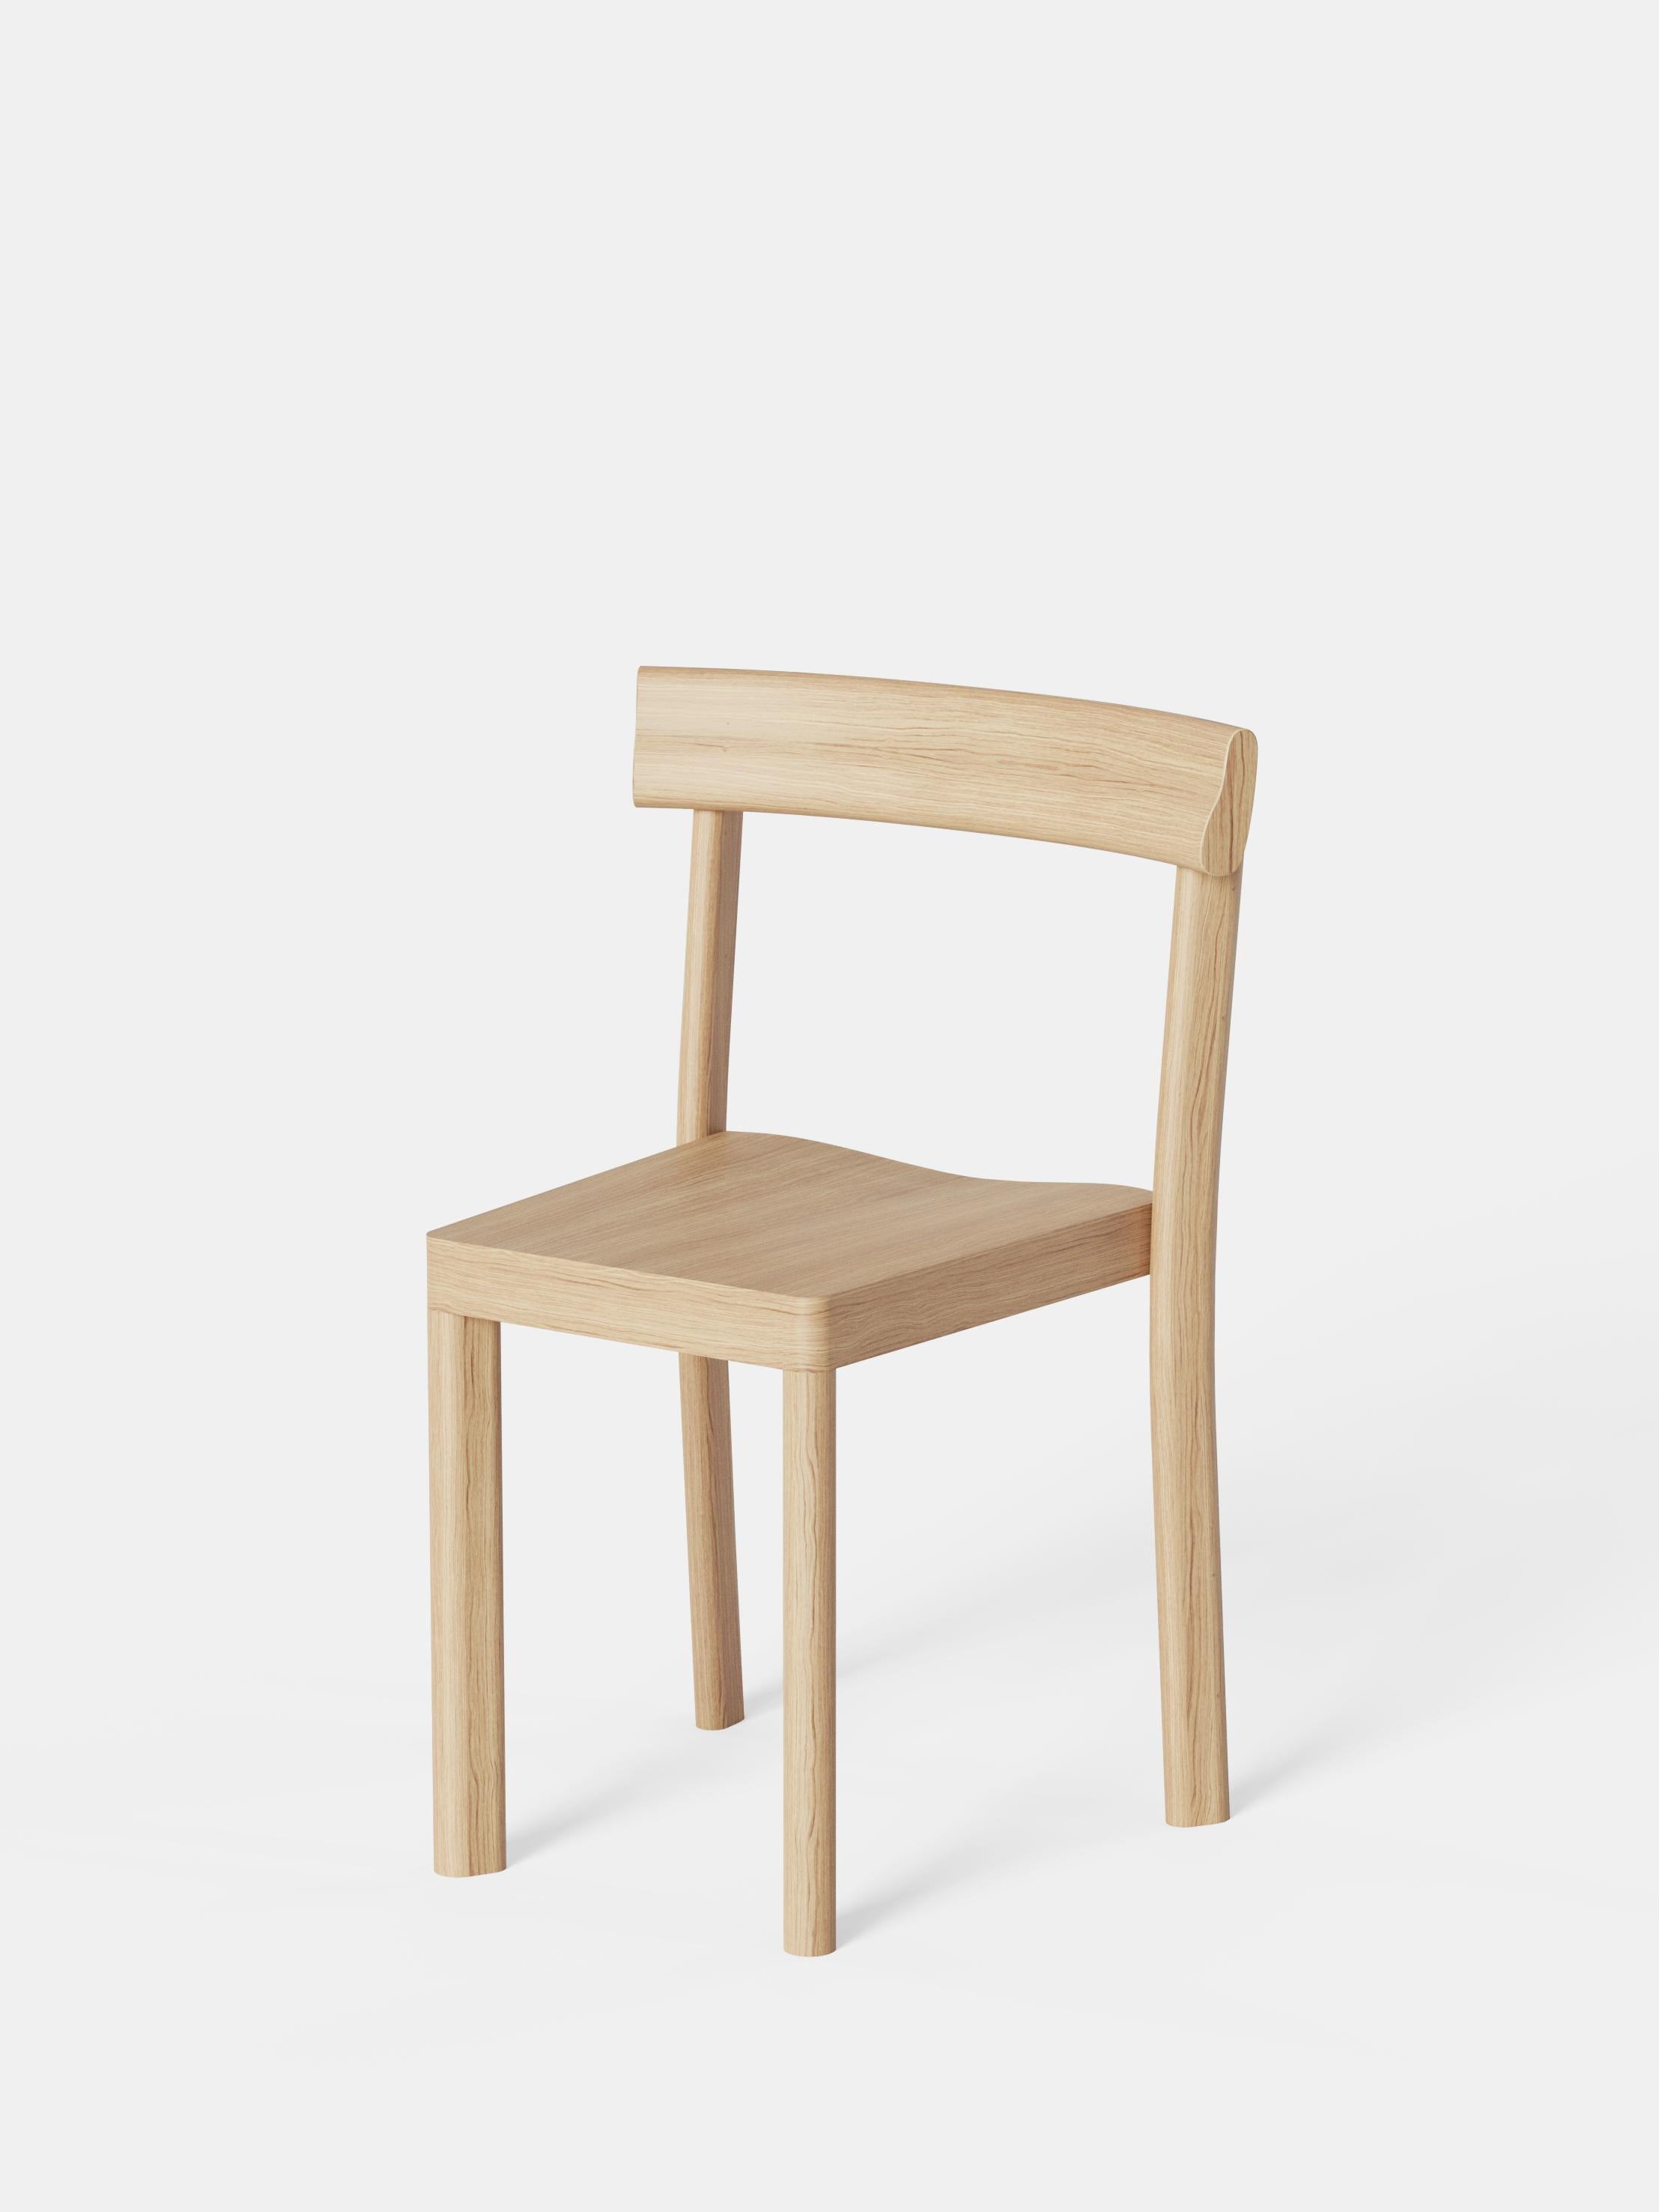 Set of 6 Galta Oak Chairs by Kann Design
Dimensions: D 43 x W 51 x H 80 cm.
Materials: Natural oak.
Available in other finishes.

With the Galta, SCMP Design Office rethinks the classic bistro chair. The result is the epitome of lightness in terms